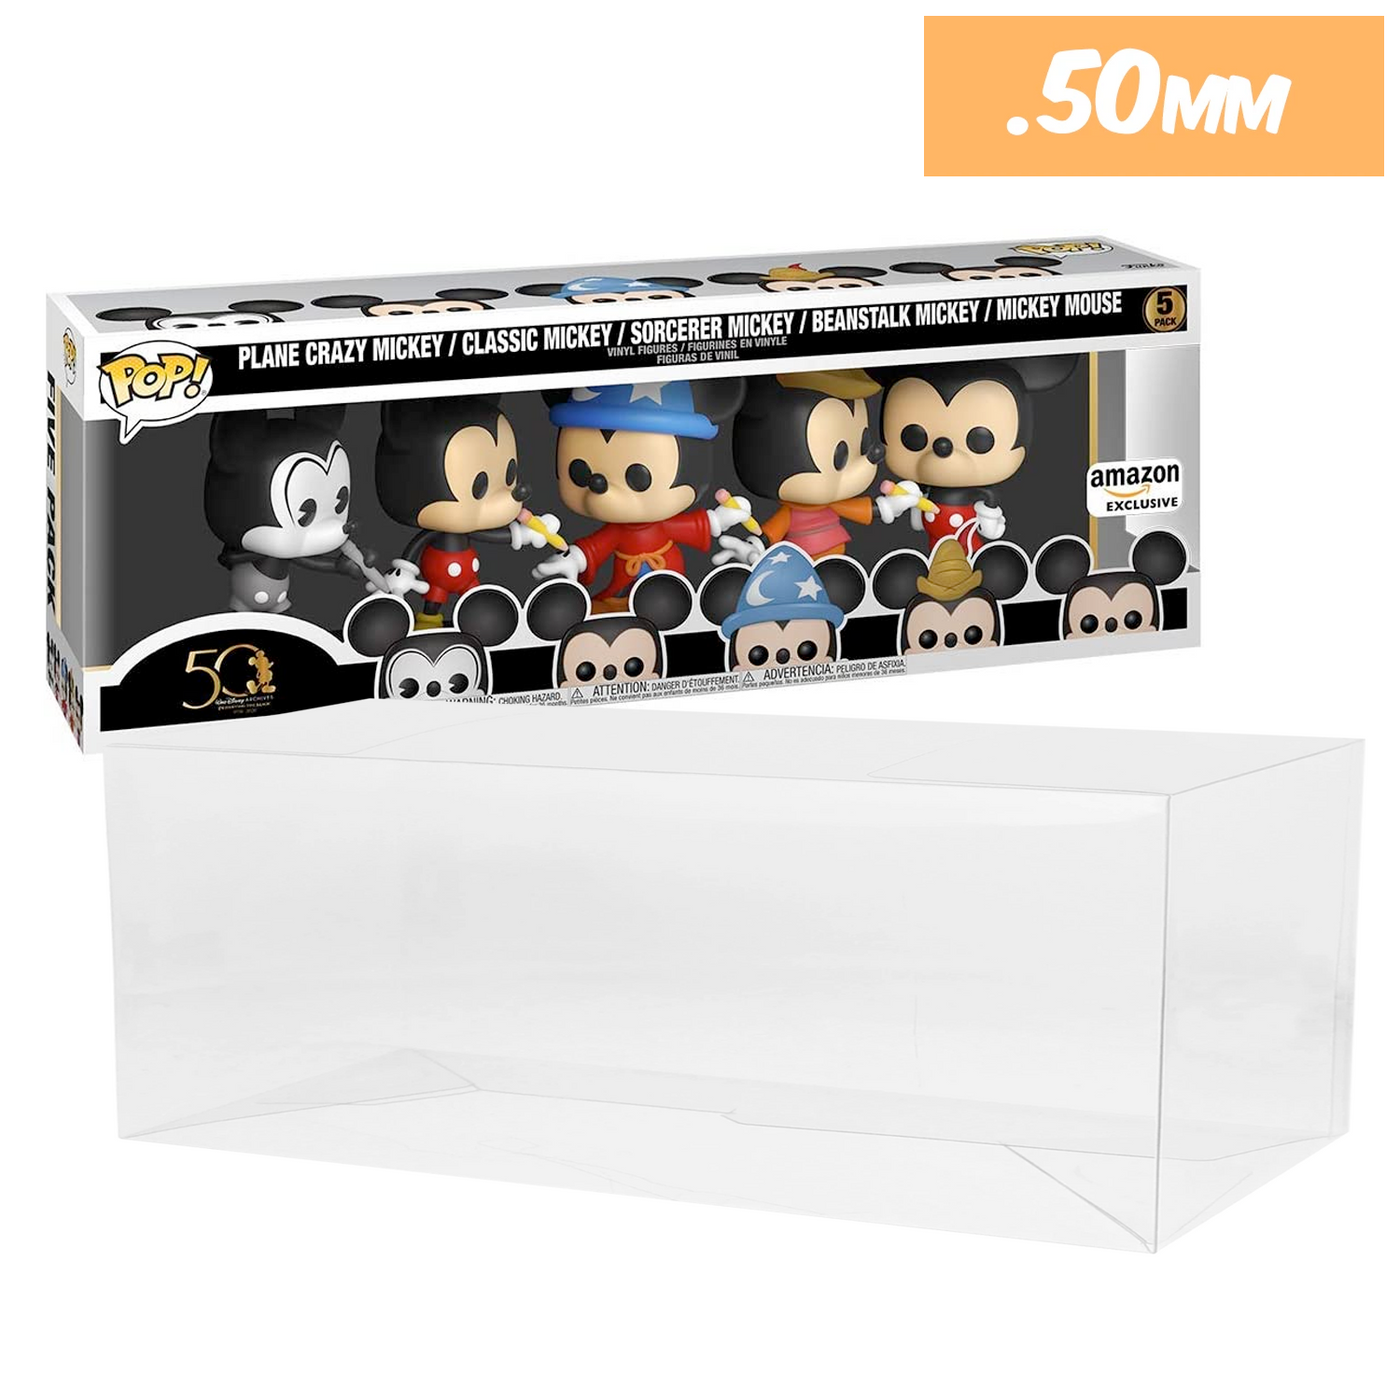 amazon mickey mouse 5 pack best funko pop protectors thick strong uv scratch flat top stack vinyl display geek plastic shield vaulted eco armor fits collect protect display case kollector protector